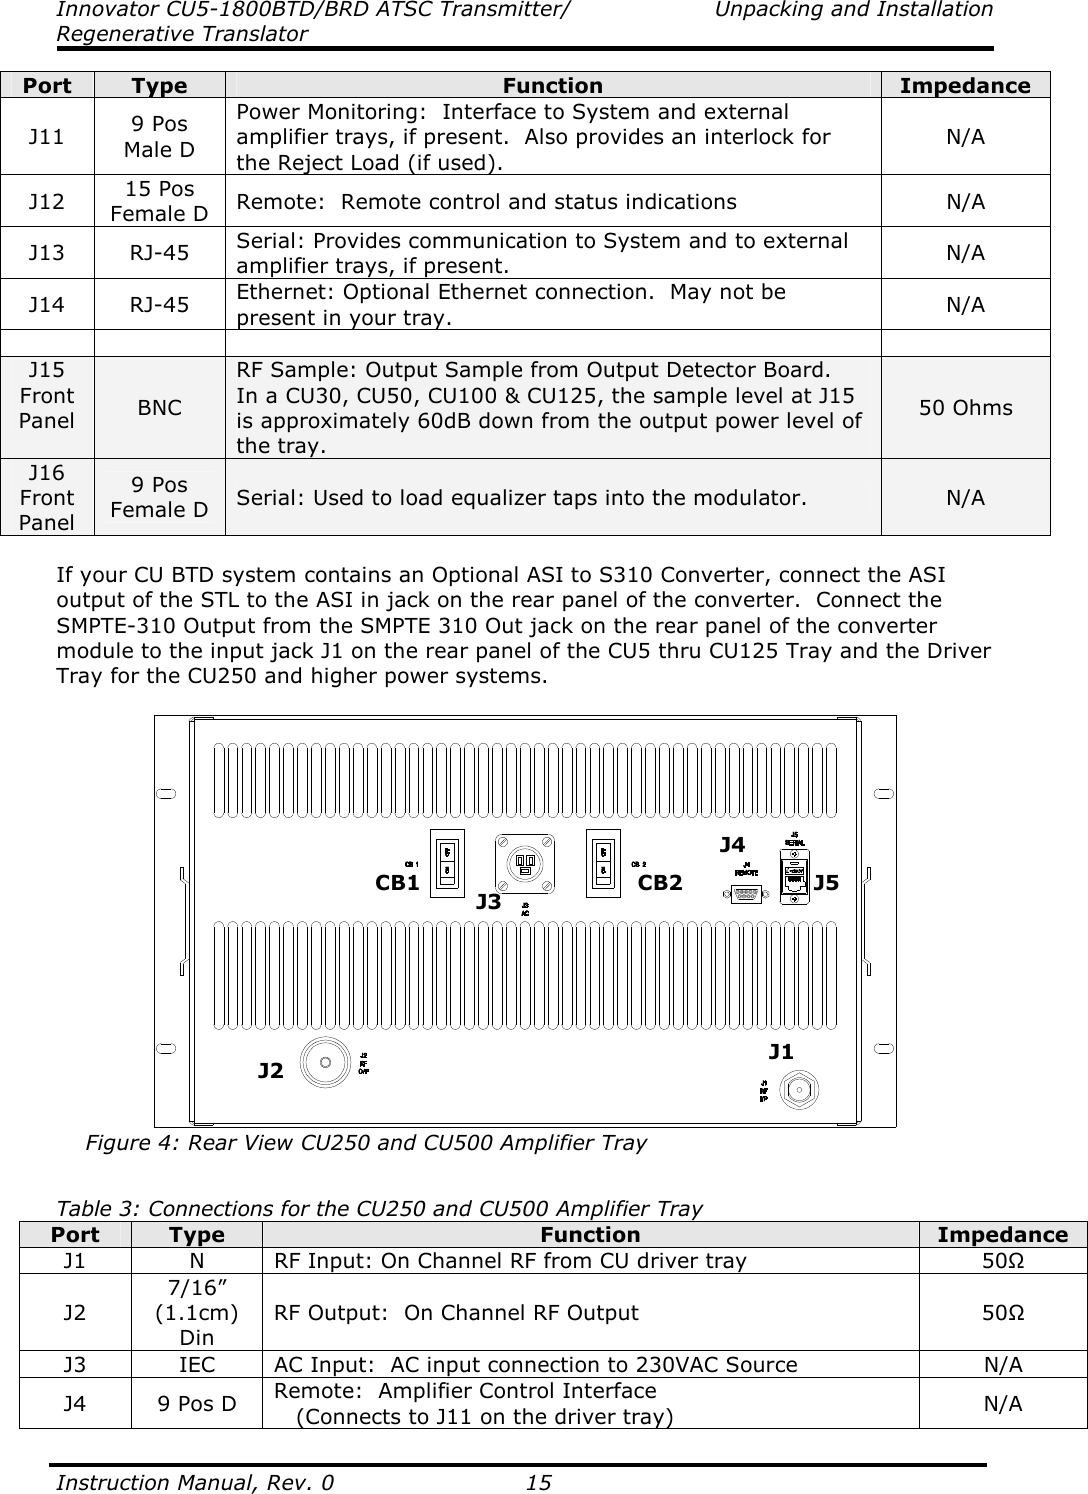 Innovator CU5-1800BTD/BRD ATSC Transmitter/  Unpacking and Installation Regenerative Translator  Instruction Manual, Rev. 0    15 Port  Type  Function  Impedance J11  9 Pos Male D Power Monitoring:  Interface to System and external amplifier trays, if present.  Also provides an interlock for the Reject Load (if used). N/A J12  15 Pos Female D  Remote:  Remote control and status indications  N/A J13  RJ-45  Serial: Provides communication to System and to external amplifier trays, if present.  N/A J14  RJ-45  Ethernet: Optional Ethernet connection.  May not be present in your tray.  N/A        J15 Front Panel  BNC RF Sample: Output Sample from Output Detector Board. In a CU30, CU50, CU100 &amp; CU125, the sample level at J15 is approximately 60dB down from the output power level of the tray. 50 Ohms J16 Front Panel 9 Pos Female D  Serial: Used to load equalizer taps into the modulator.  N/A  If your CU BTD system contains an Optional ASI to S310 Converter, connect the ASI output of the STL to the ASI in jack on the rear panel of the converter.  Connect the SMPTE-310 Output from the SMPTE 310 Out jack on the rear panel of the converter module to the input jack J1 on the rear panel of the CU5 thru CU125 Tray and the Driver Tray for the CU250 and higher power systems.       Figure 4: Rear View CU250 and CU500 Amplifier Tray   Table 3: Connections for the CU250 and CU500 Amplifier Tray Port  Type  Function  Impedance J1  N  RF Input: On Channel RF from CU driver tray  50Ω J2 7/16” (1.1cm) Din RF Output:  On Channel RF Output  50Ω J3  IEC  AC Input:  AC input connection to 230VAC Source  N/A J4  9 Pos D  Remote:  Amplifier Control Interface    (Connects to J11 on the driver tray)  N/A J1  J3  J4   J2 CB1CB2  J5 